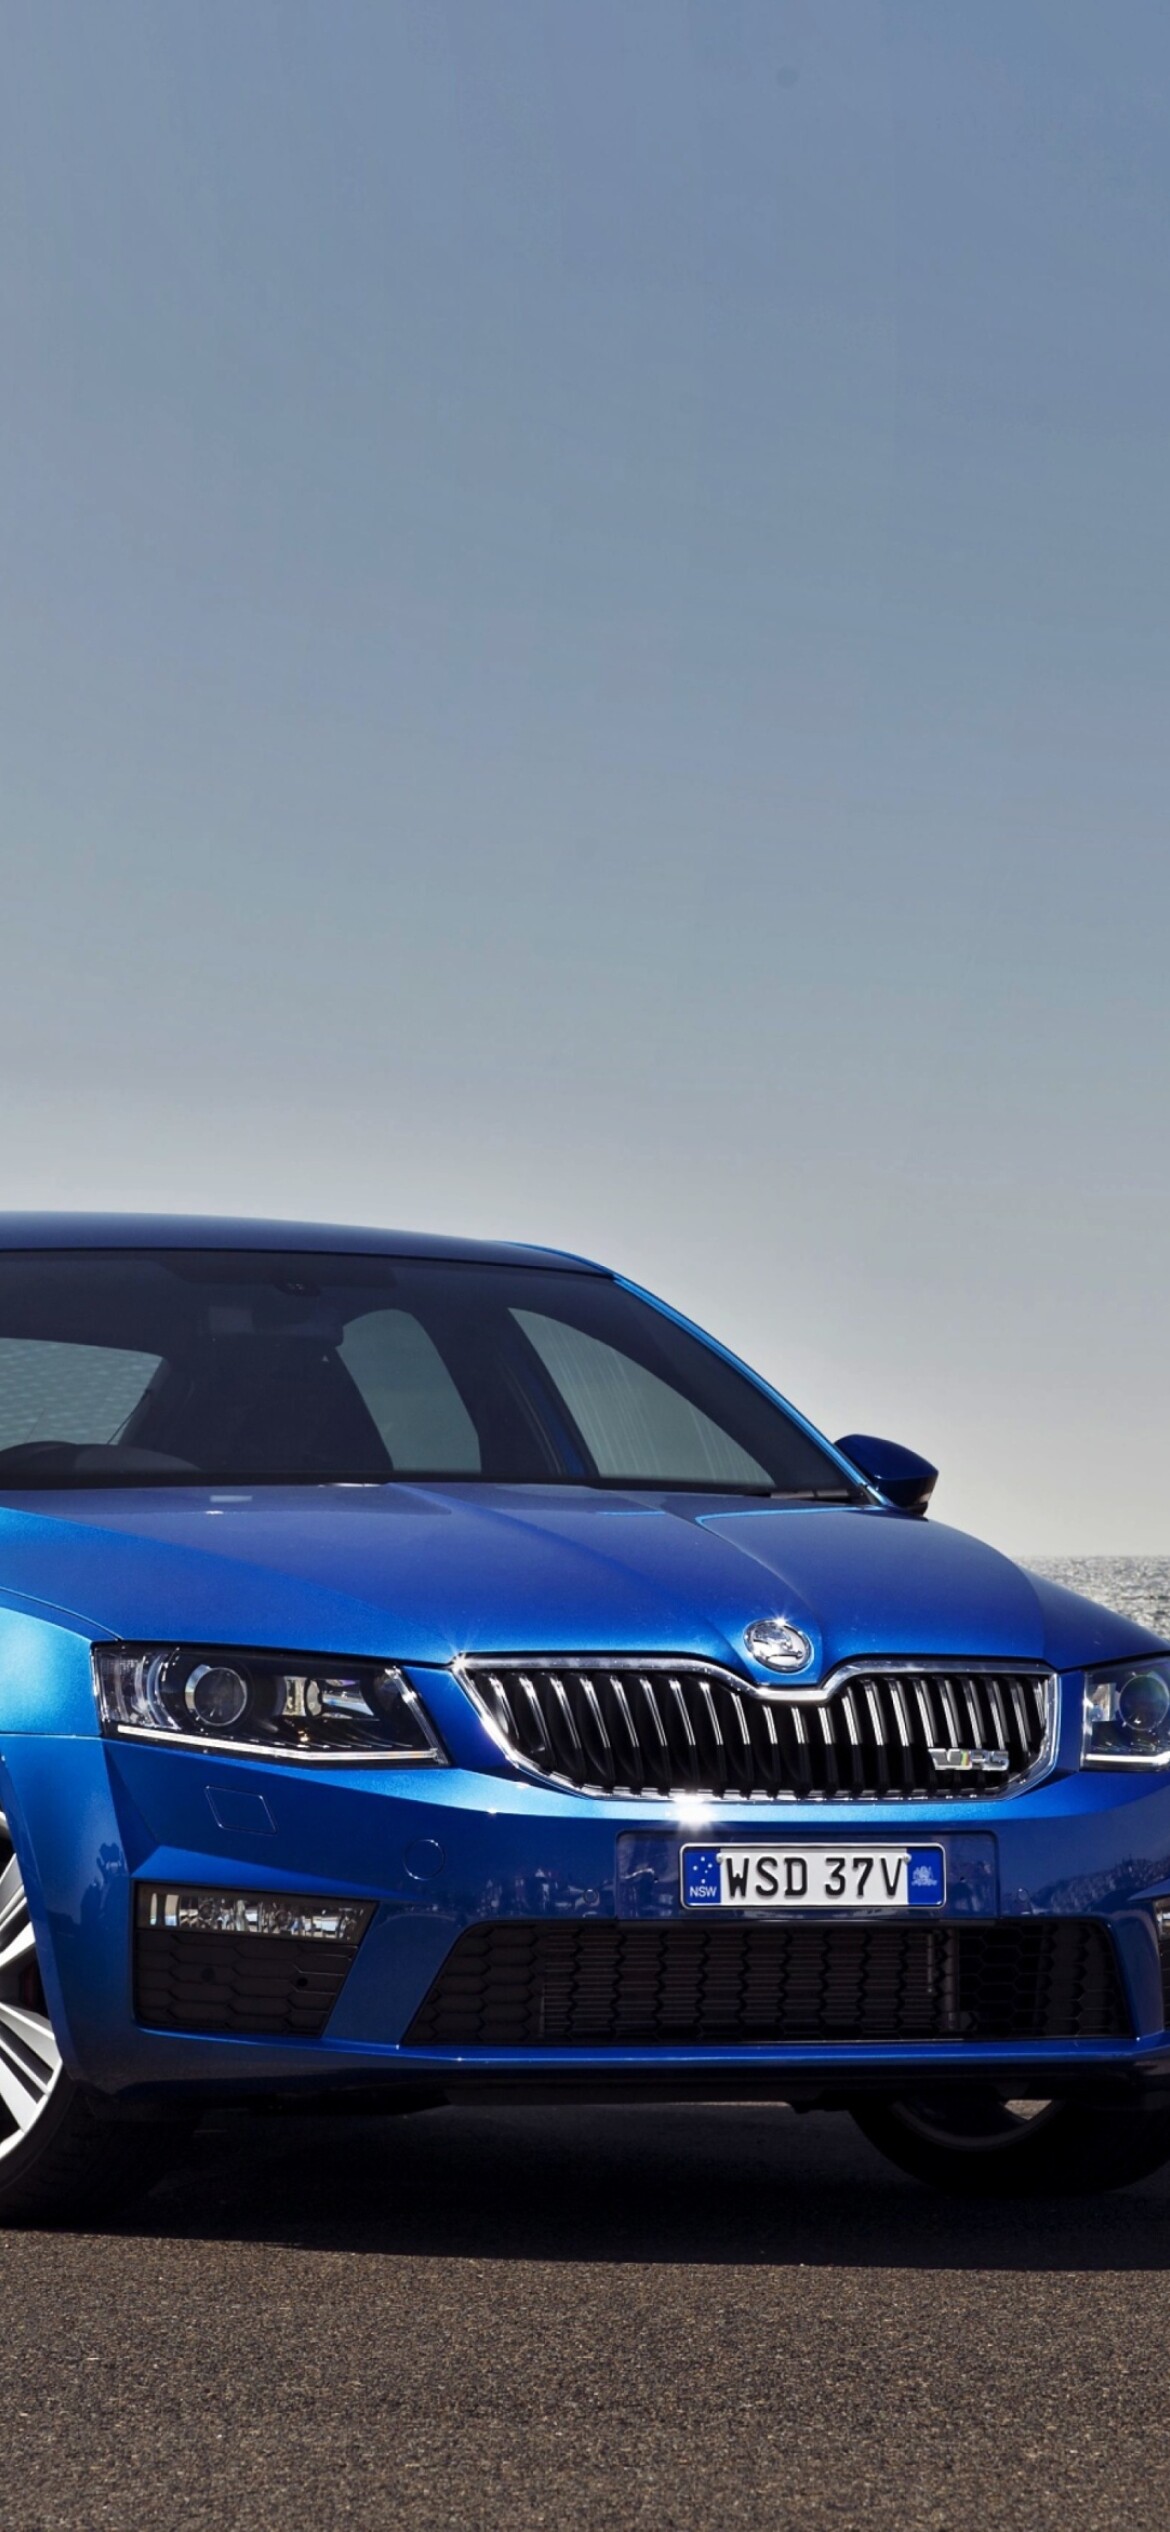 Skoda: Octavia, DSG automatic transmission controlled by a shift-by-wire system. 1170x2540 HD Wallpaper.